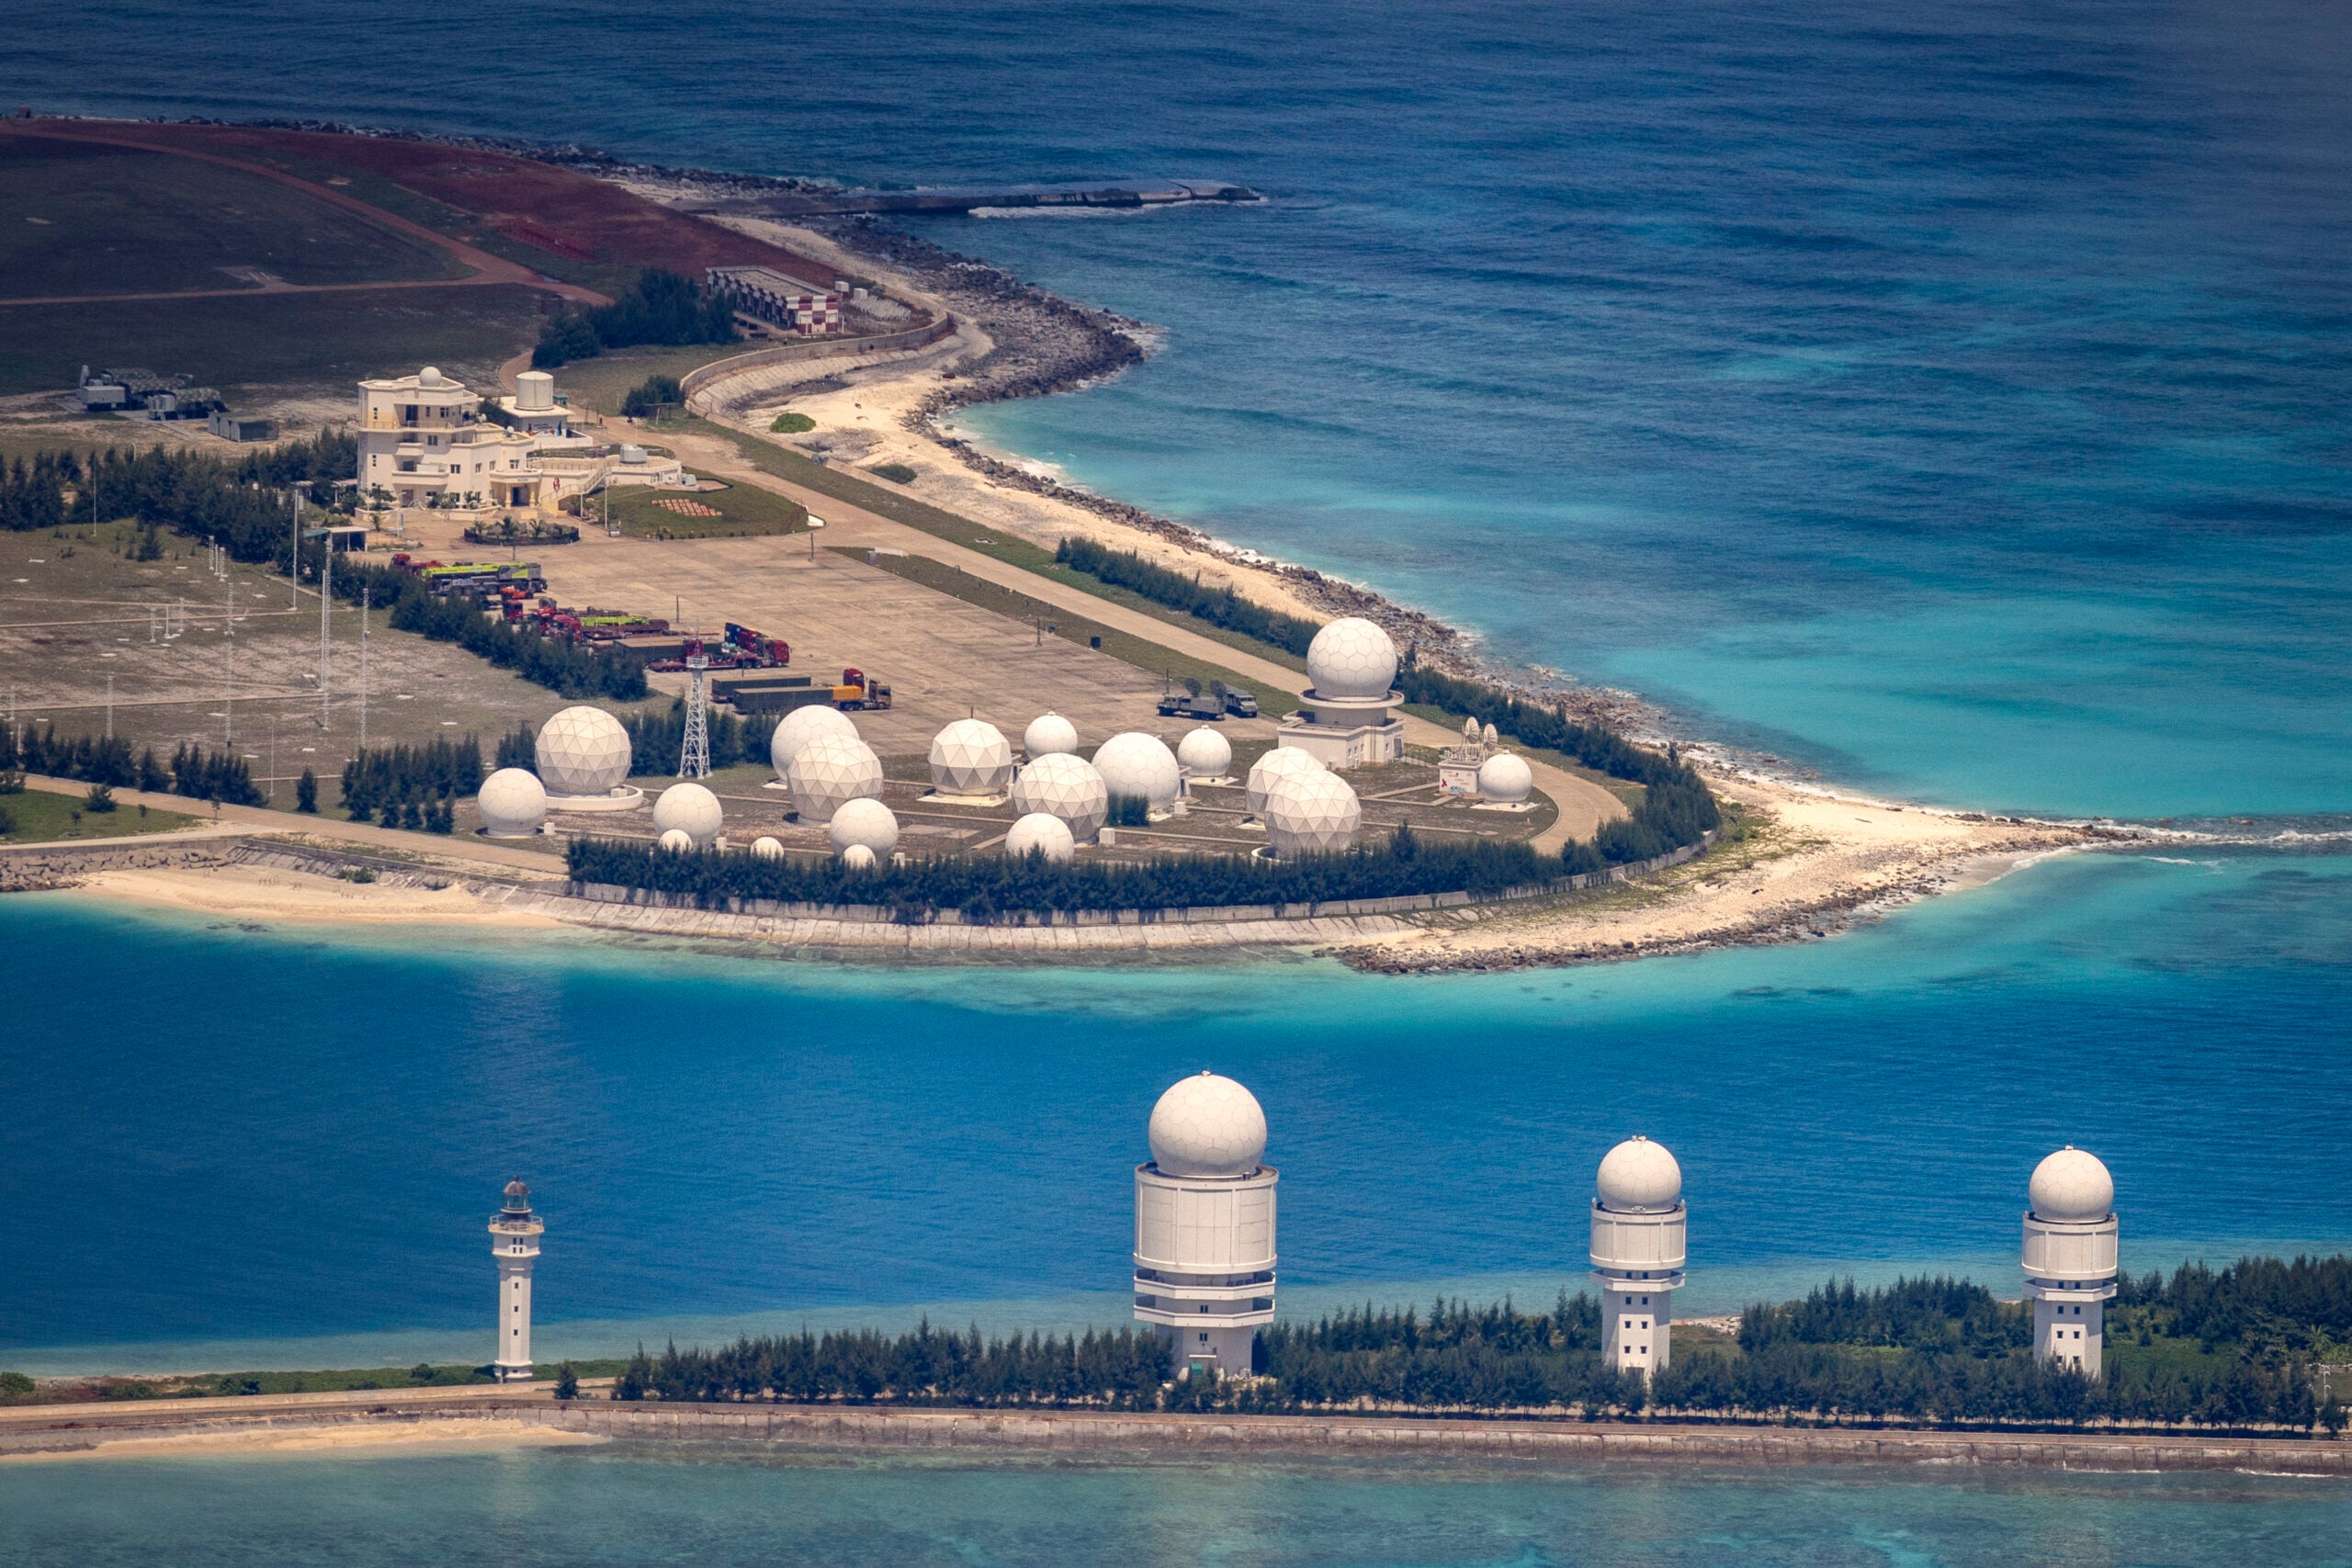 SPRATLY ISLANDS, AT SEA - OCTOBER 25: Buildings and structures are seen on the artificial island built by China in Fiery Cross Reef on October 25, 2022 in Spratly Islands, South China Sea. China has progressively asserted its claim of ownership over disputed islands in the South China Sea by artificially increasing the size of islands, creating new islands and building ports, military outposts and airstrips. The South China sea is an important trade route and is of significant interest as geopolitical tensions remain high in the region. (Photo by Ezra Acayan/Getty Images)